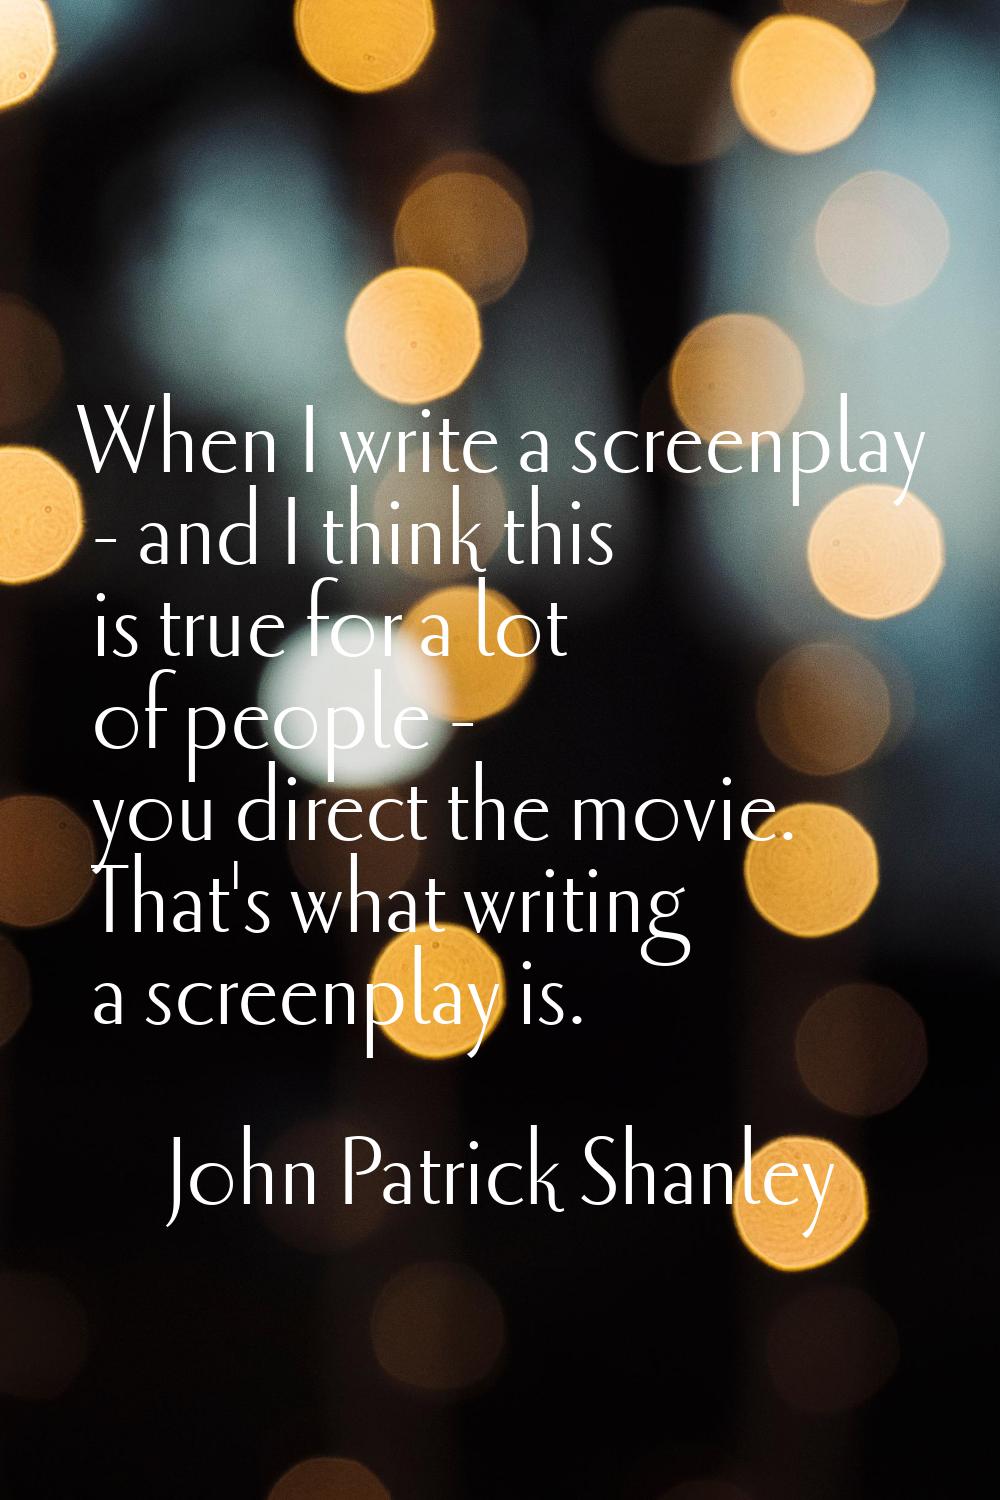 When I write a screenplay - and I think this is true for a lot of people - you direct the movie. Th